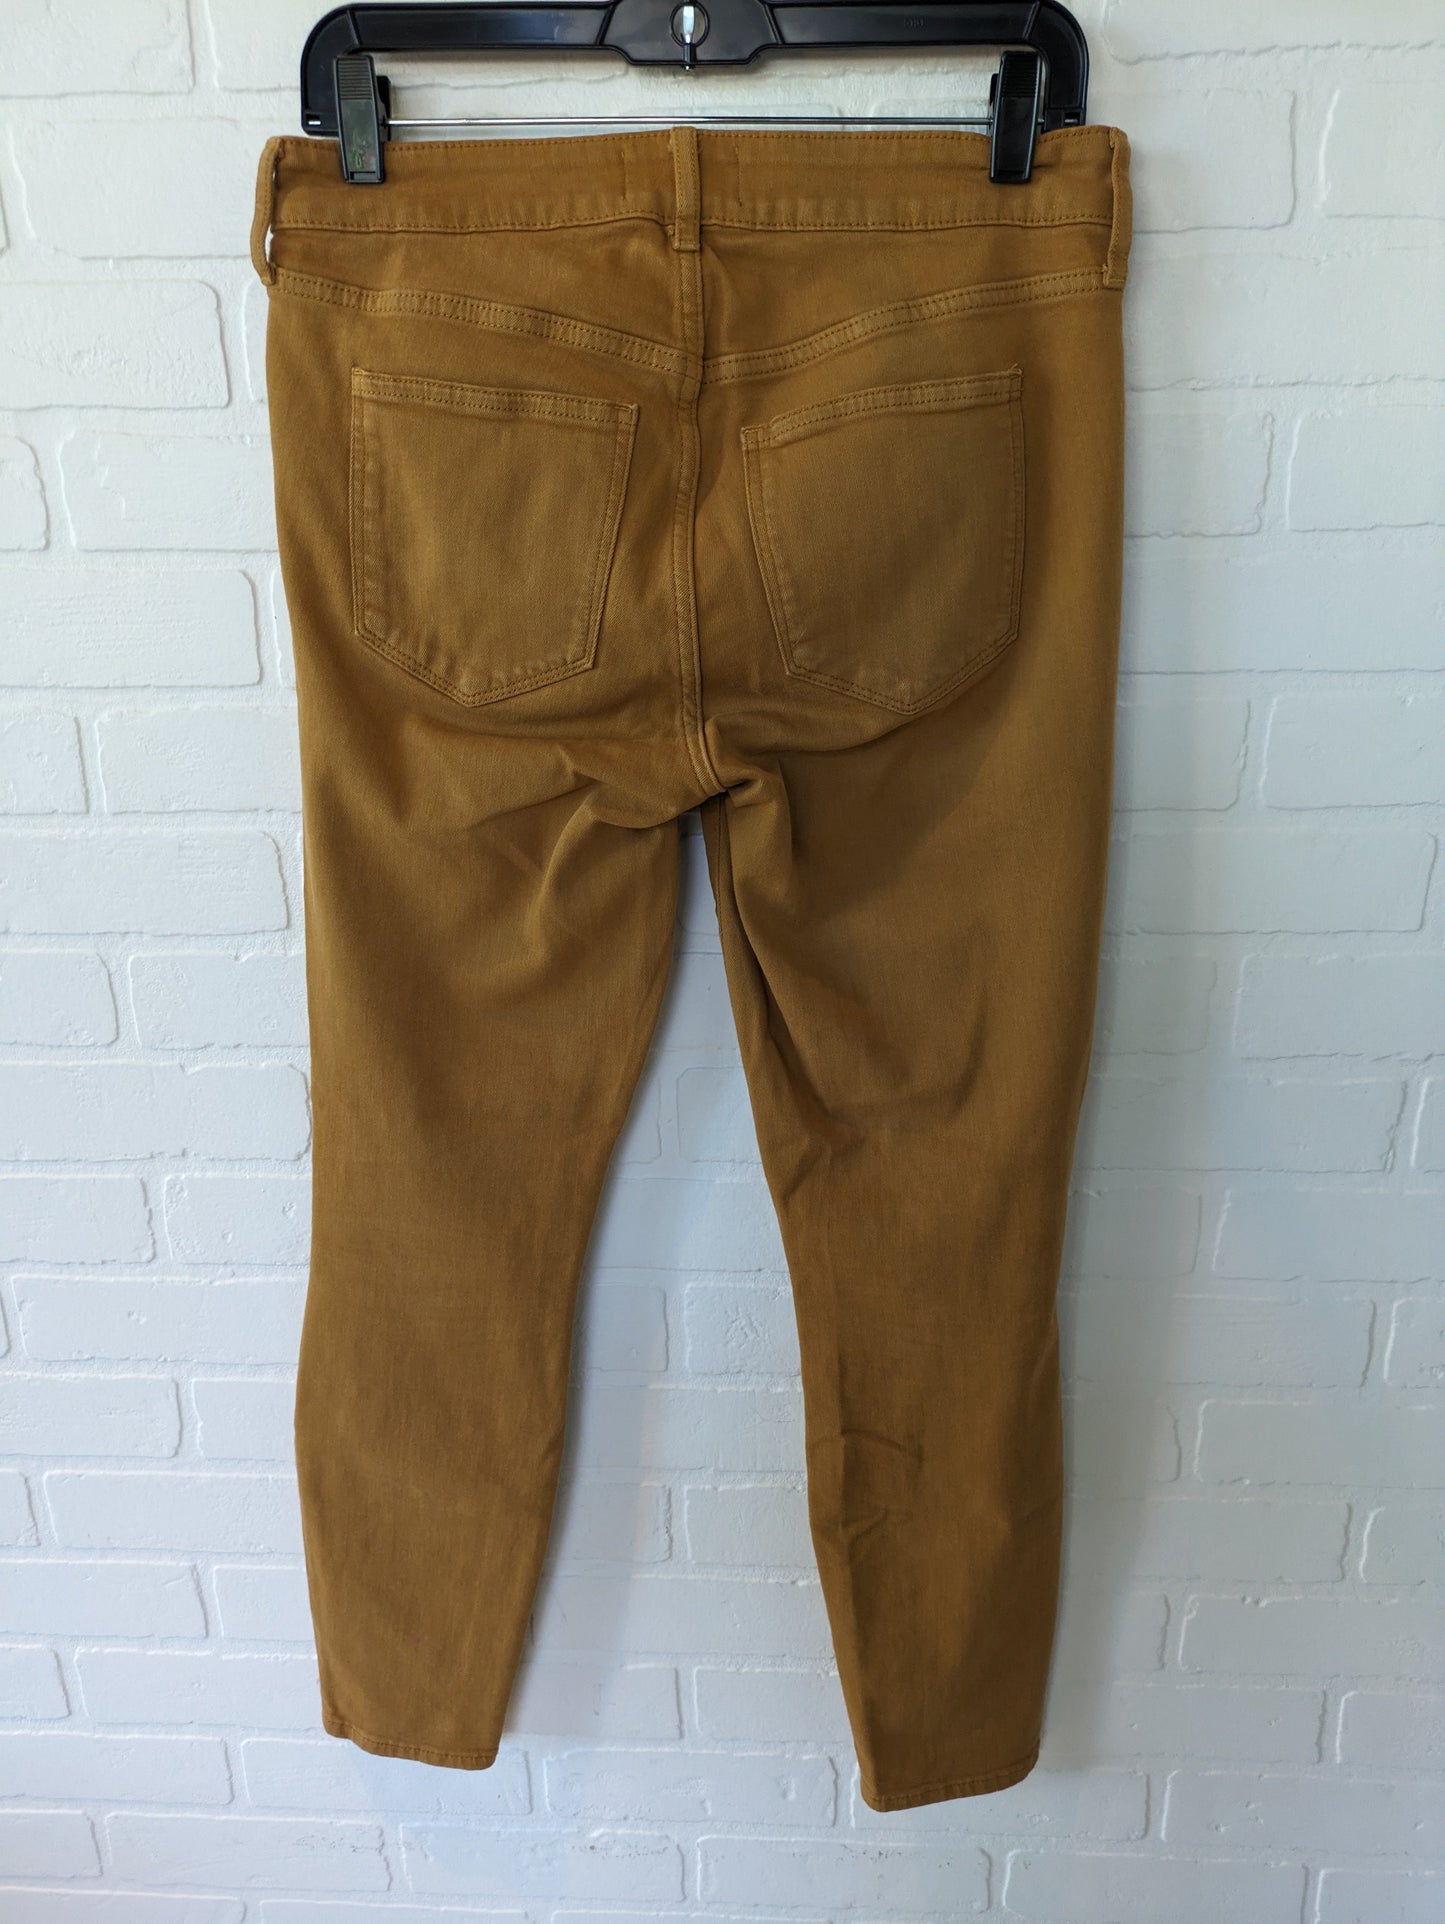 Brown Pants Other Gap, Size 8